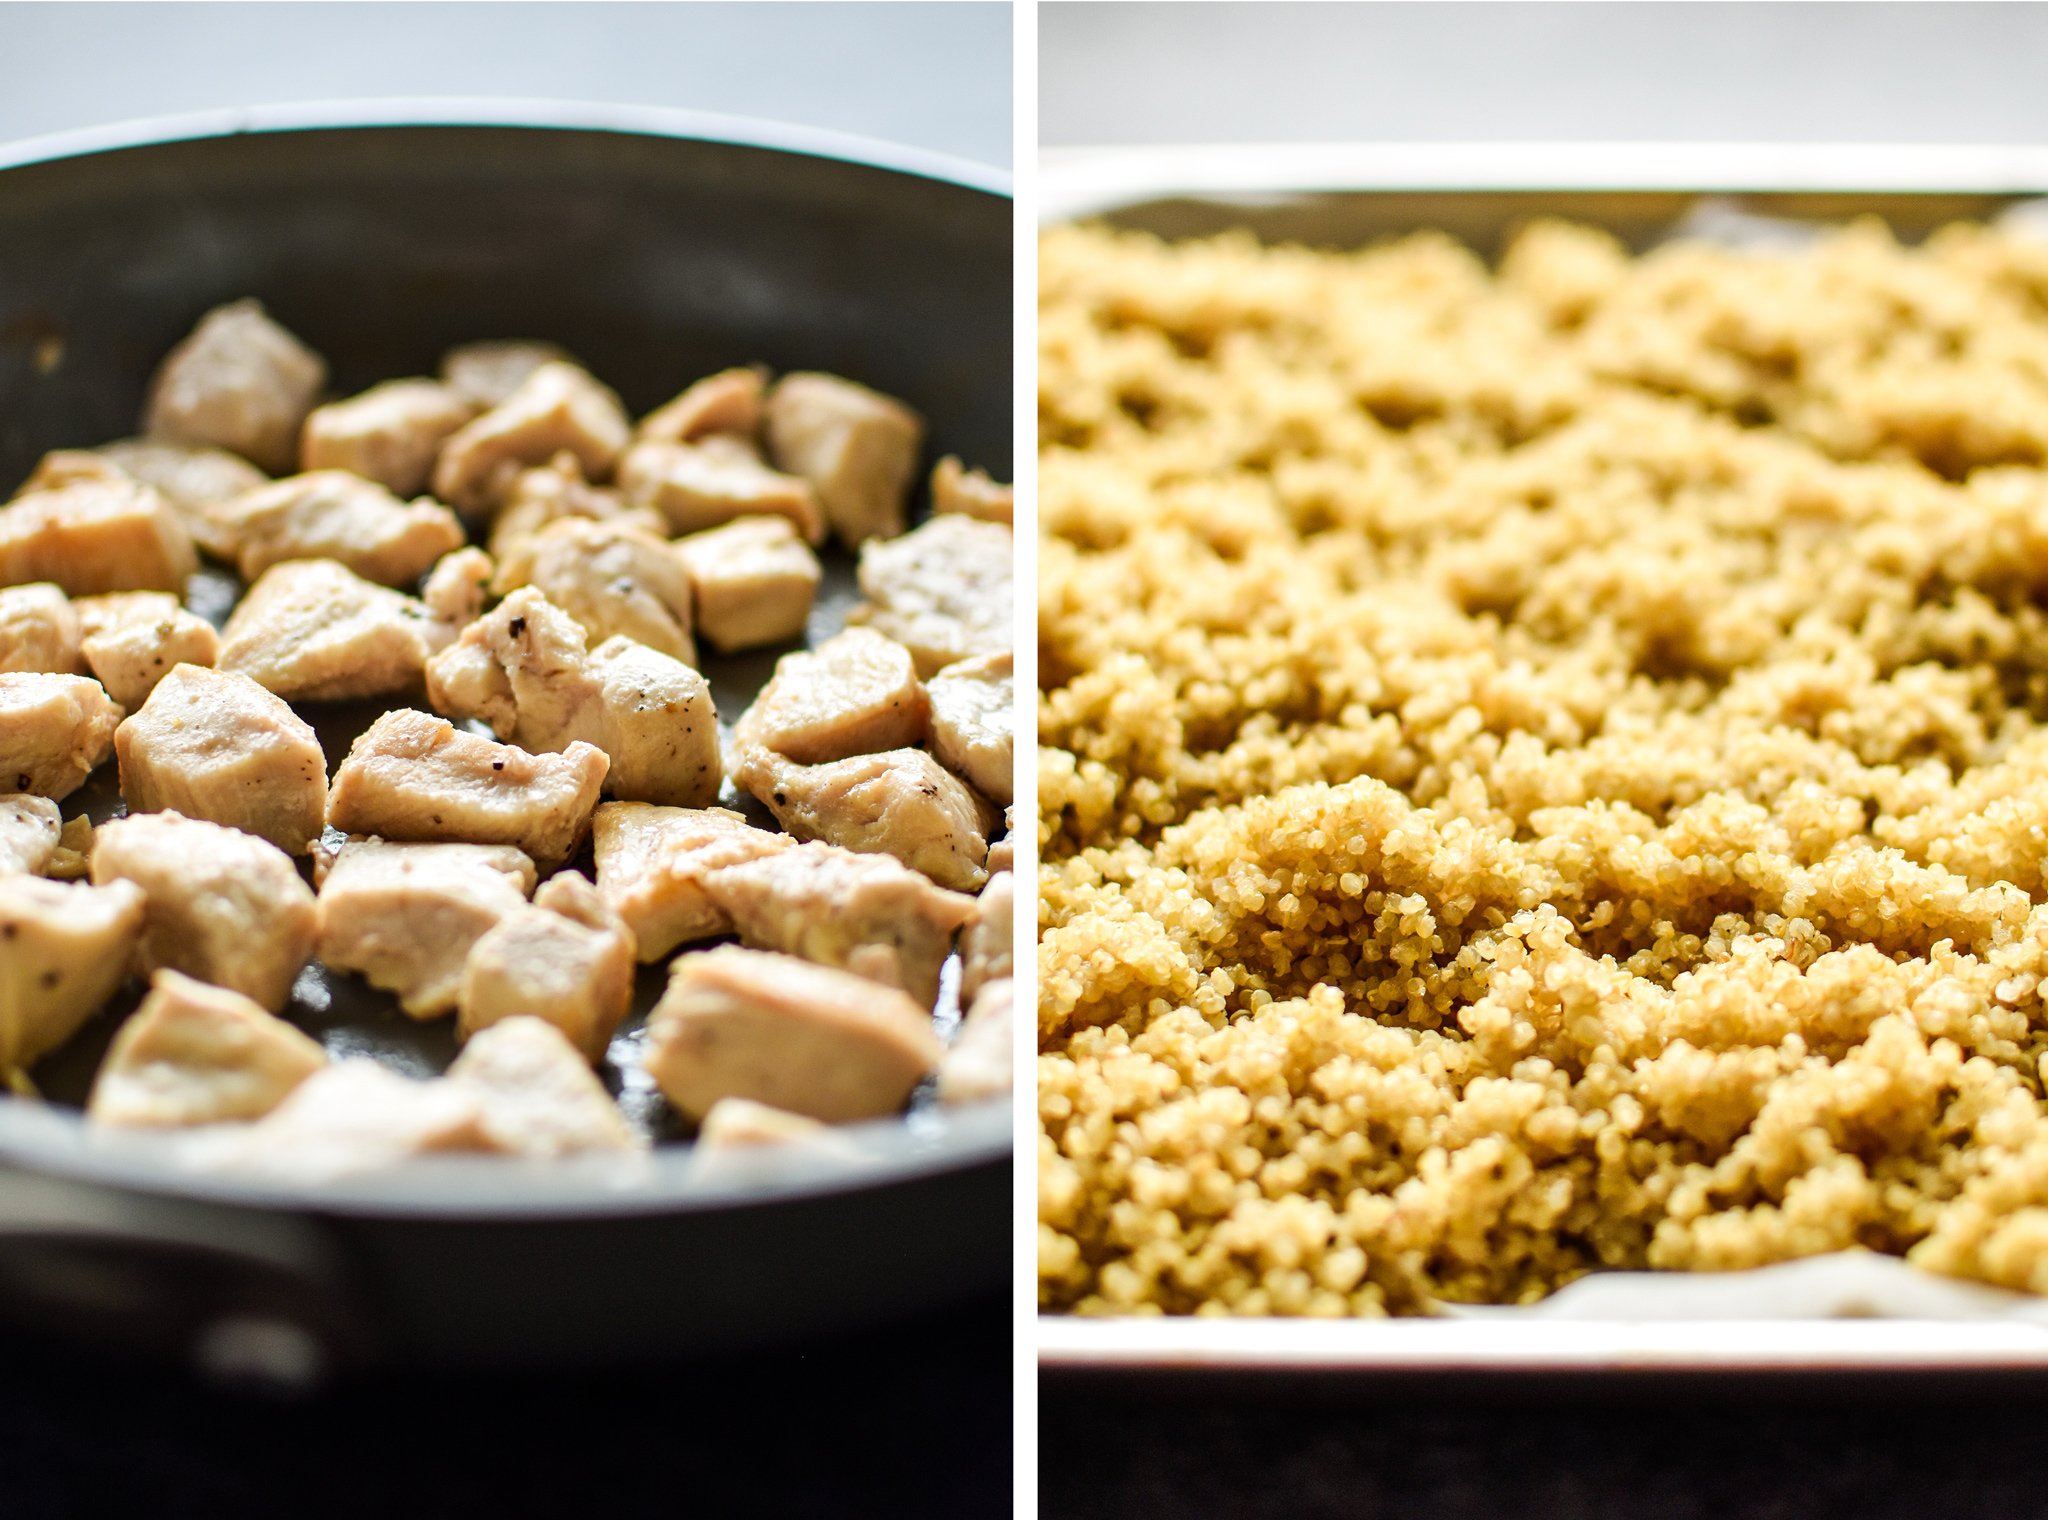 Left: Cooked chicken in a non stick pan. Right: Cooked quinoa cooling on a baking sheet.